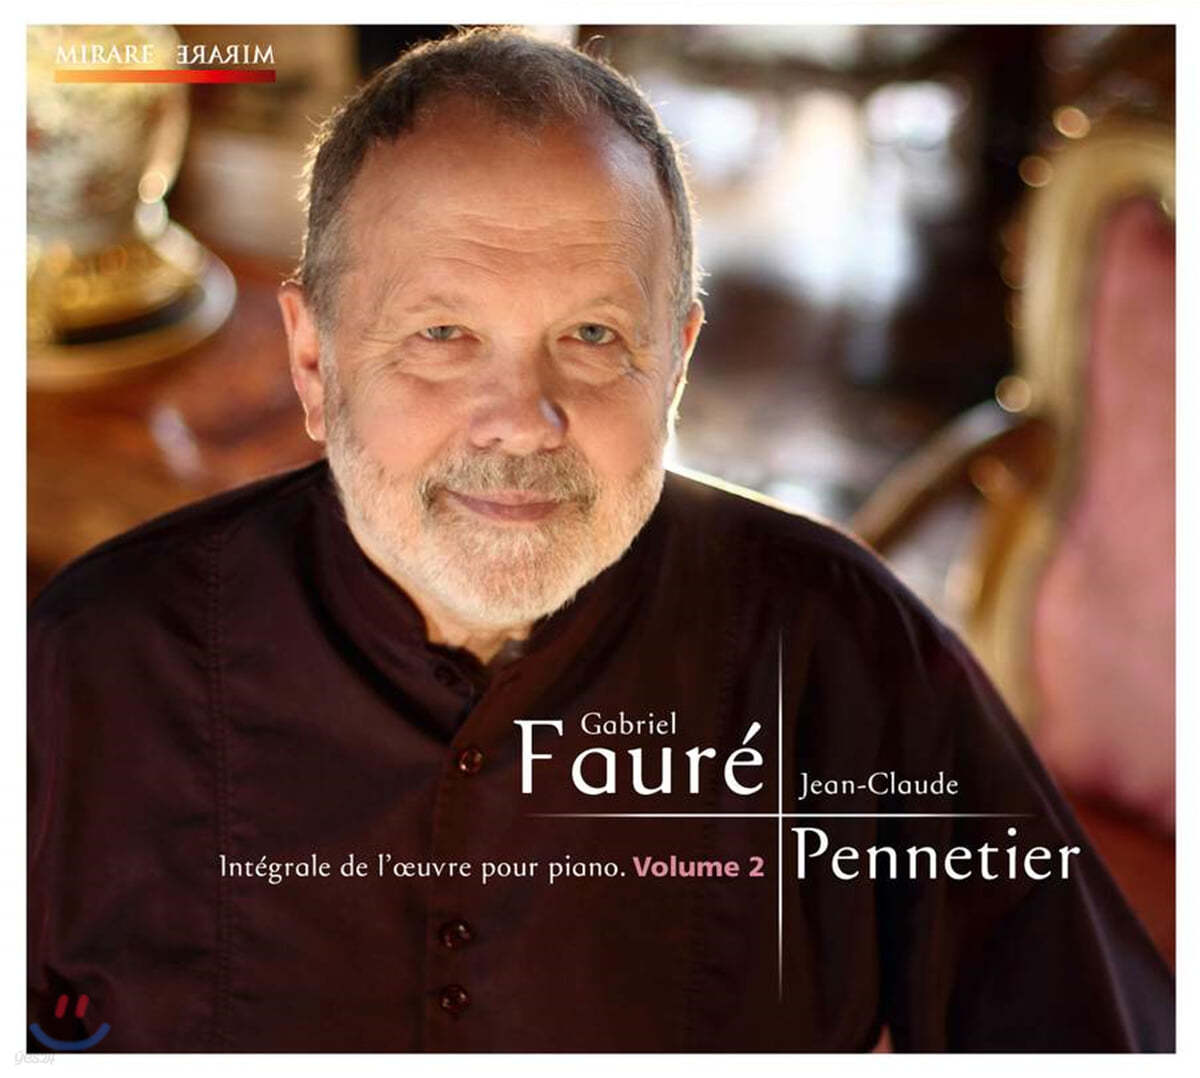 Jean-Claude Pennetier 포레: 피아노 작품 전곡 2집 (Faure: Complete Piano Music Volume 2)